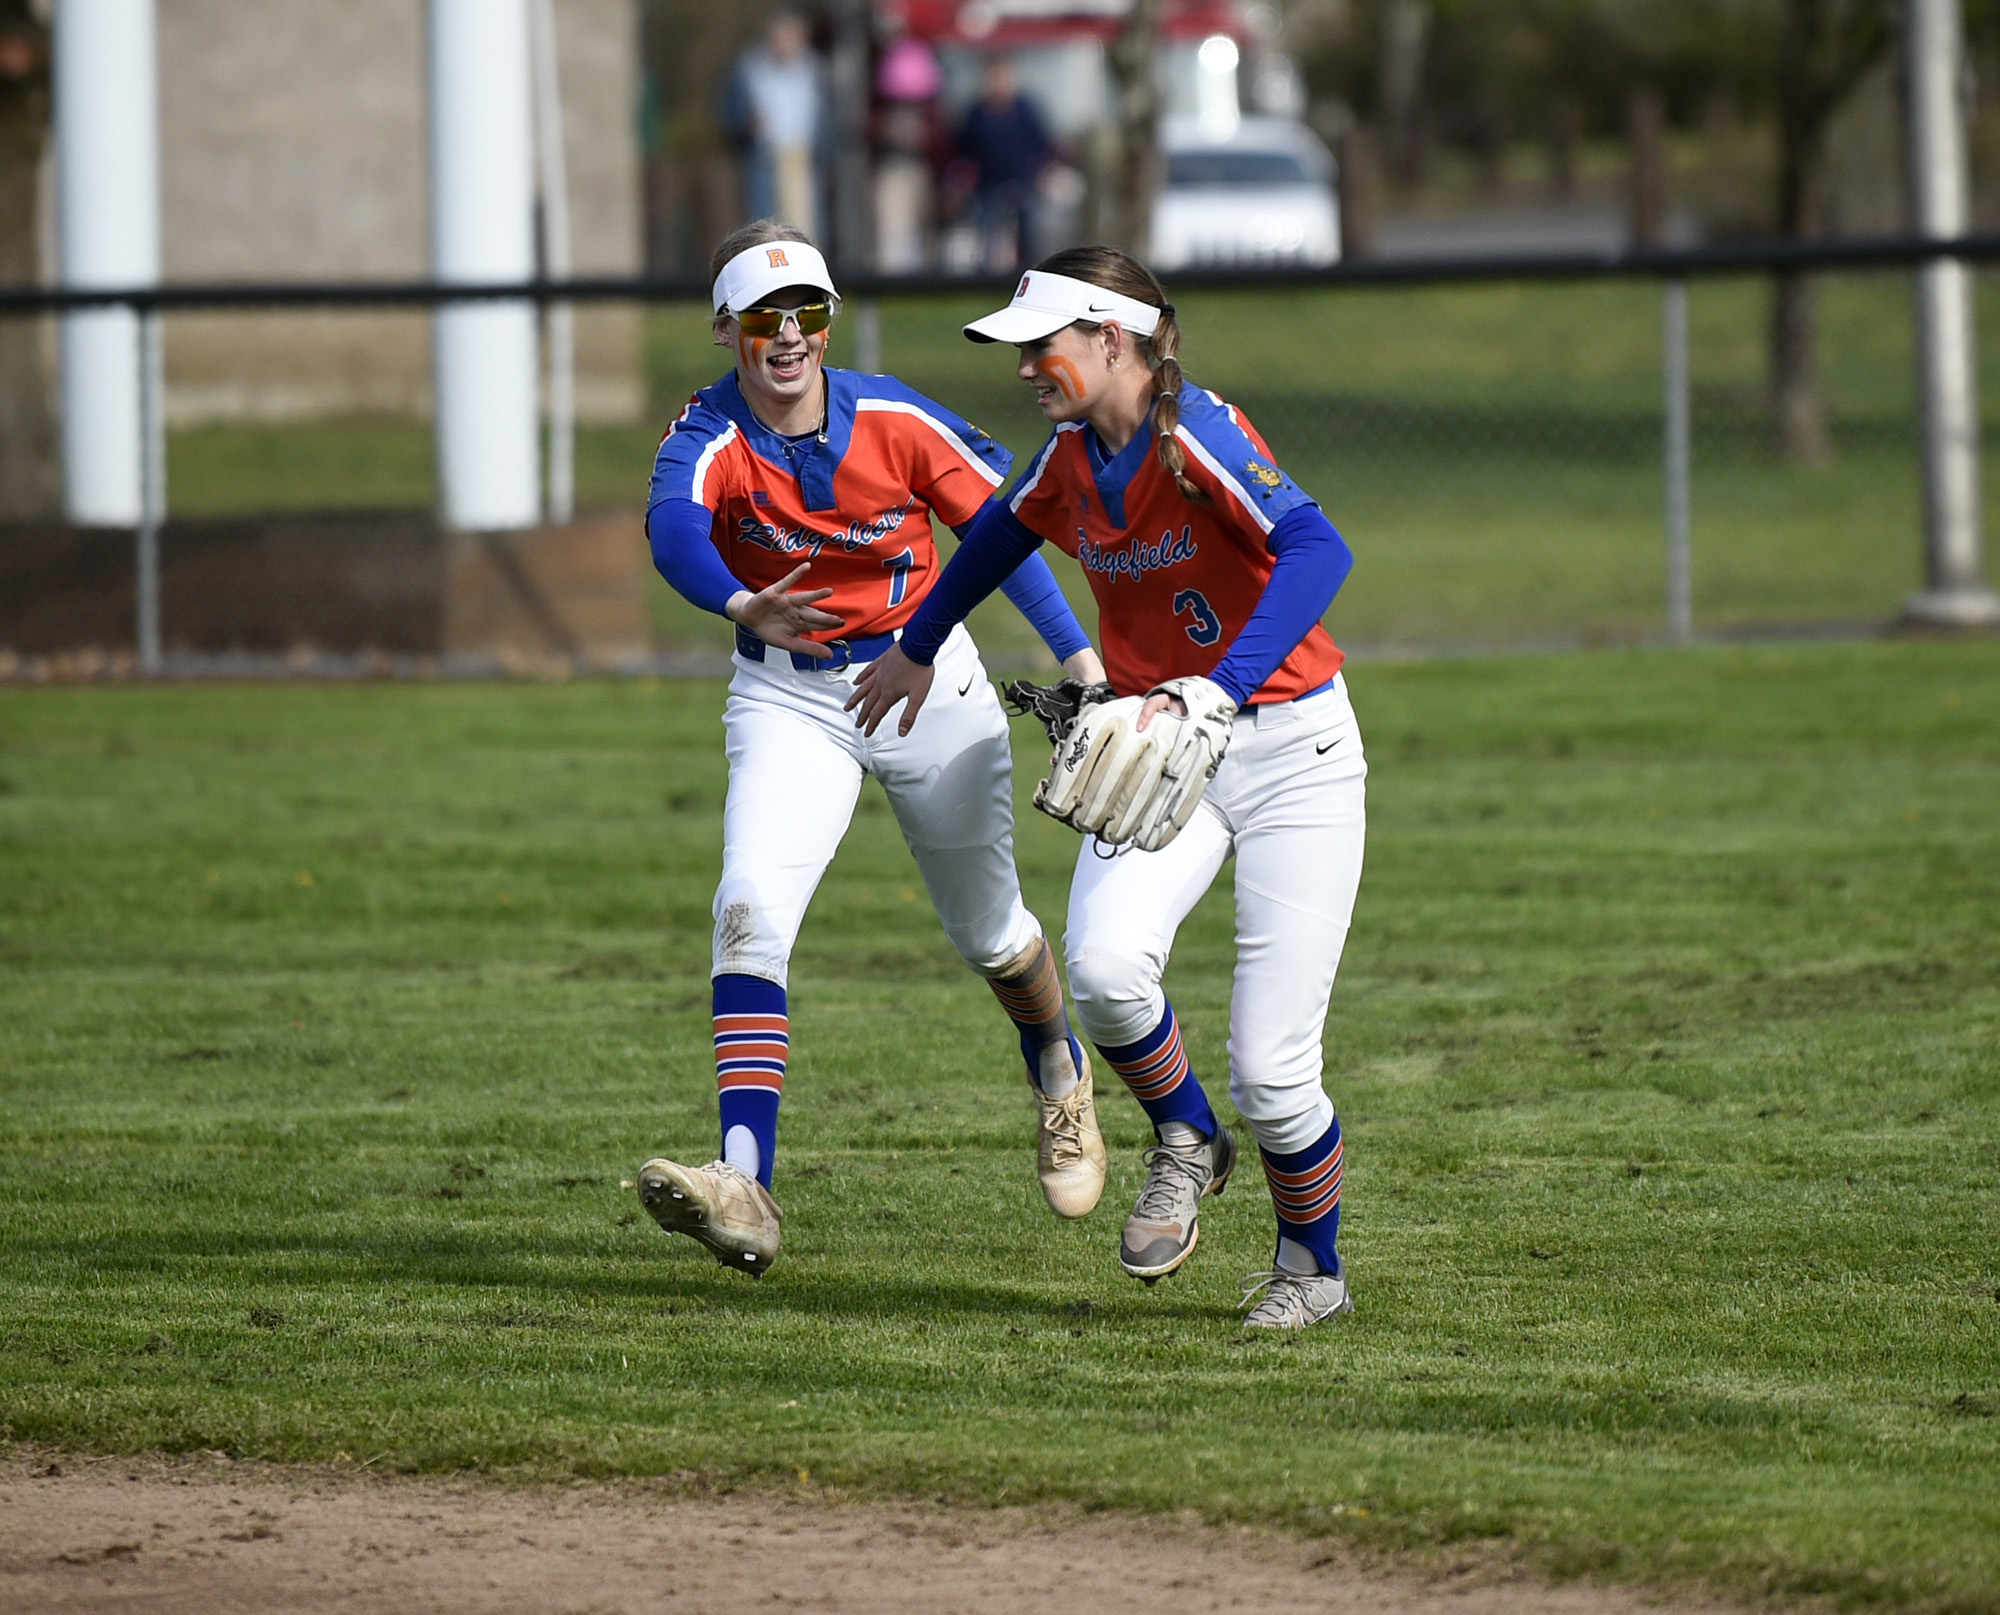 Ridgefield outfielders Charlie Harris (7) and Tava Whitlow (3) greet each other after Whitlow made a catch in the outfield during Ridgefield’s 19-6 win over Columbia River in a 2A Greater St. Helens League softball game at VGSA on Thursday, April 13, 2023.